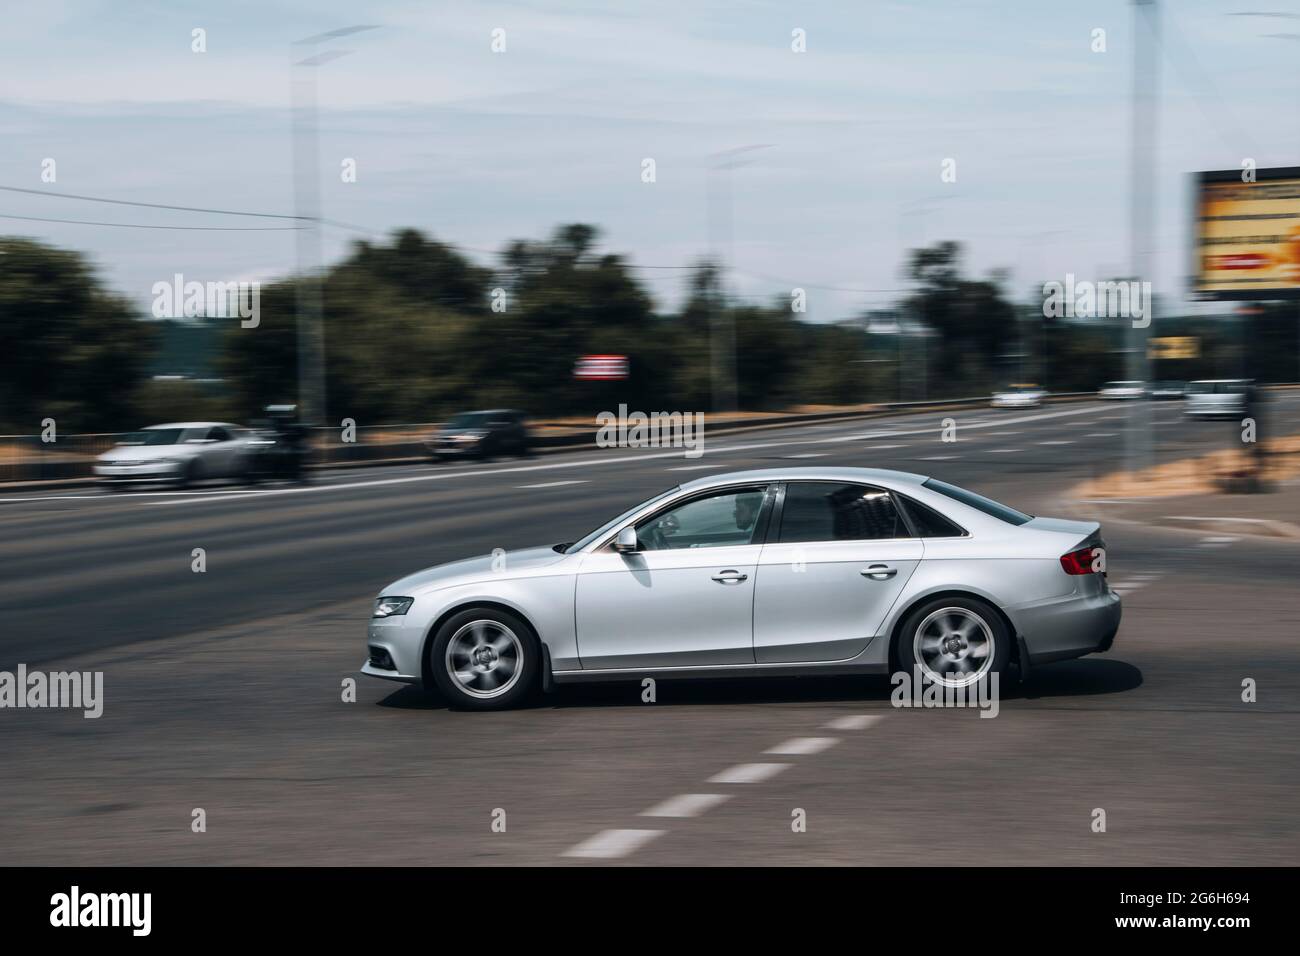 Ukraine, Kyiv - 27 June 2021: Silver Audi A4 car moving on the street. Editorial Stock Photo